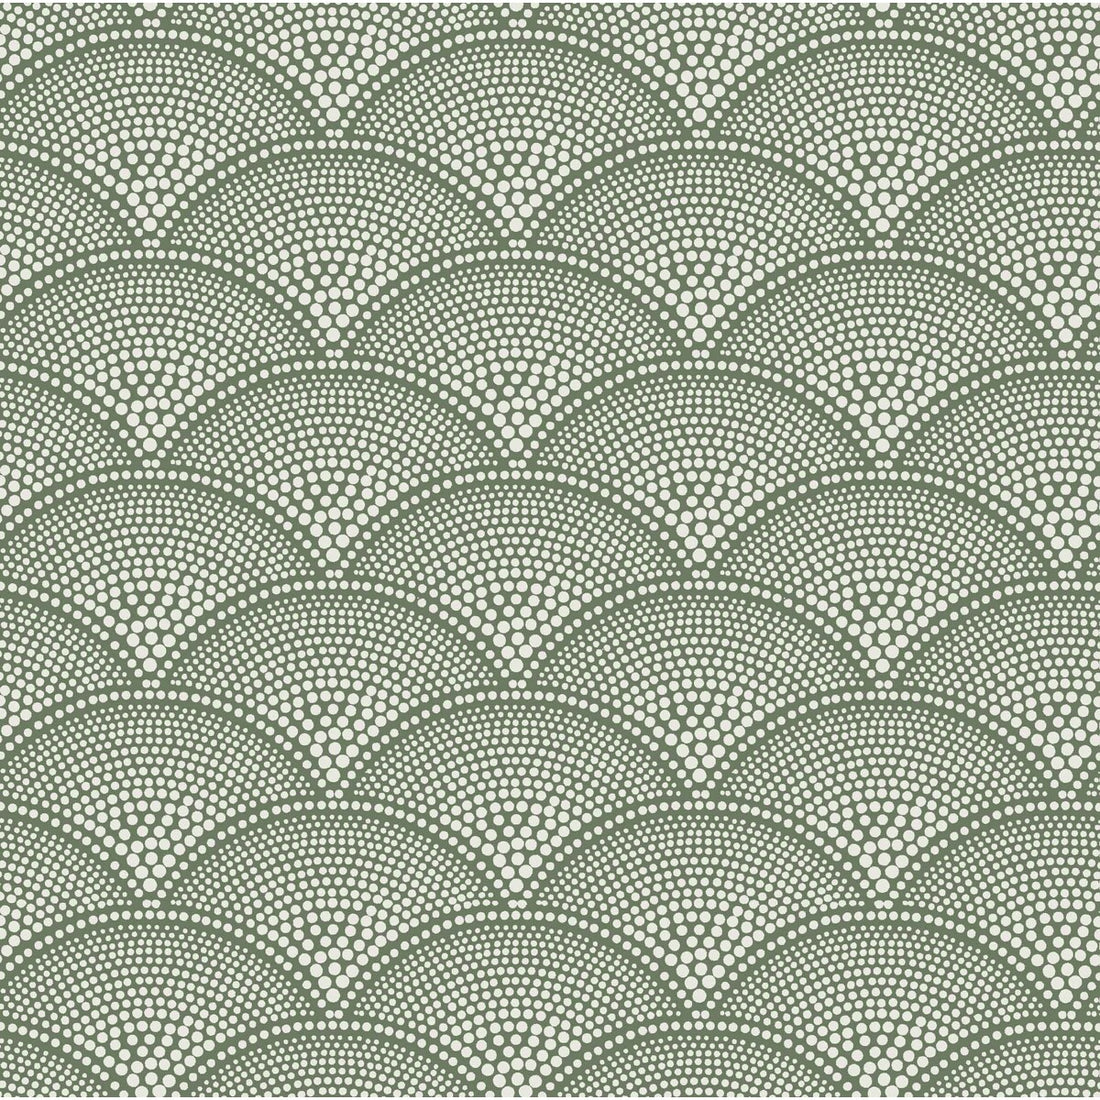 Feather Fan fabric in crm on olv color - pattern F111/8029.CS.0 - by Cole &amp; Son in the Cole &amp; Son Contemporary Fabrics collection